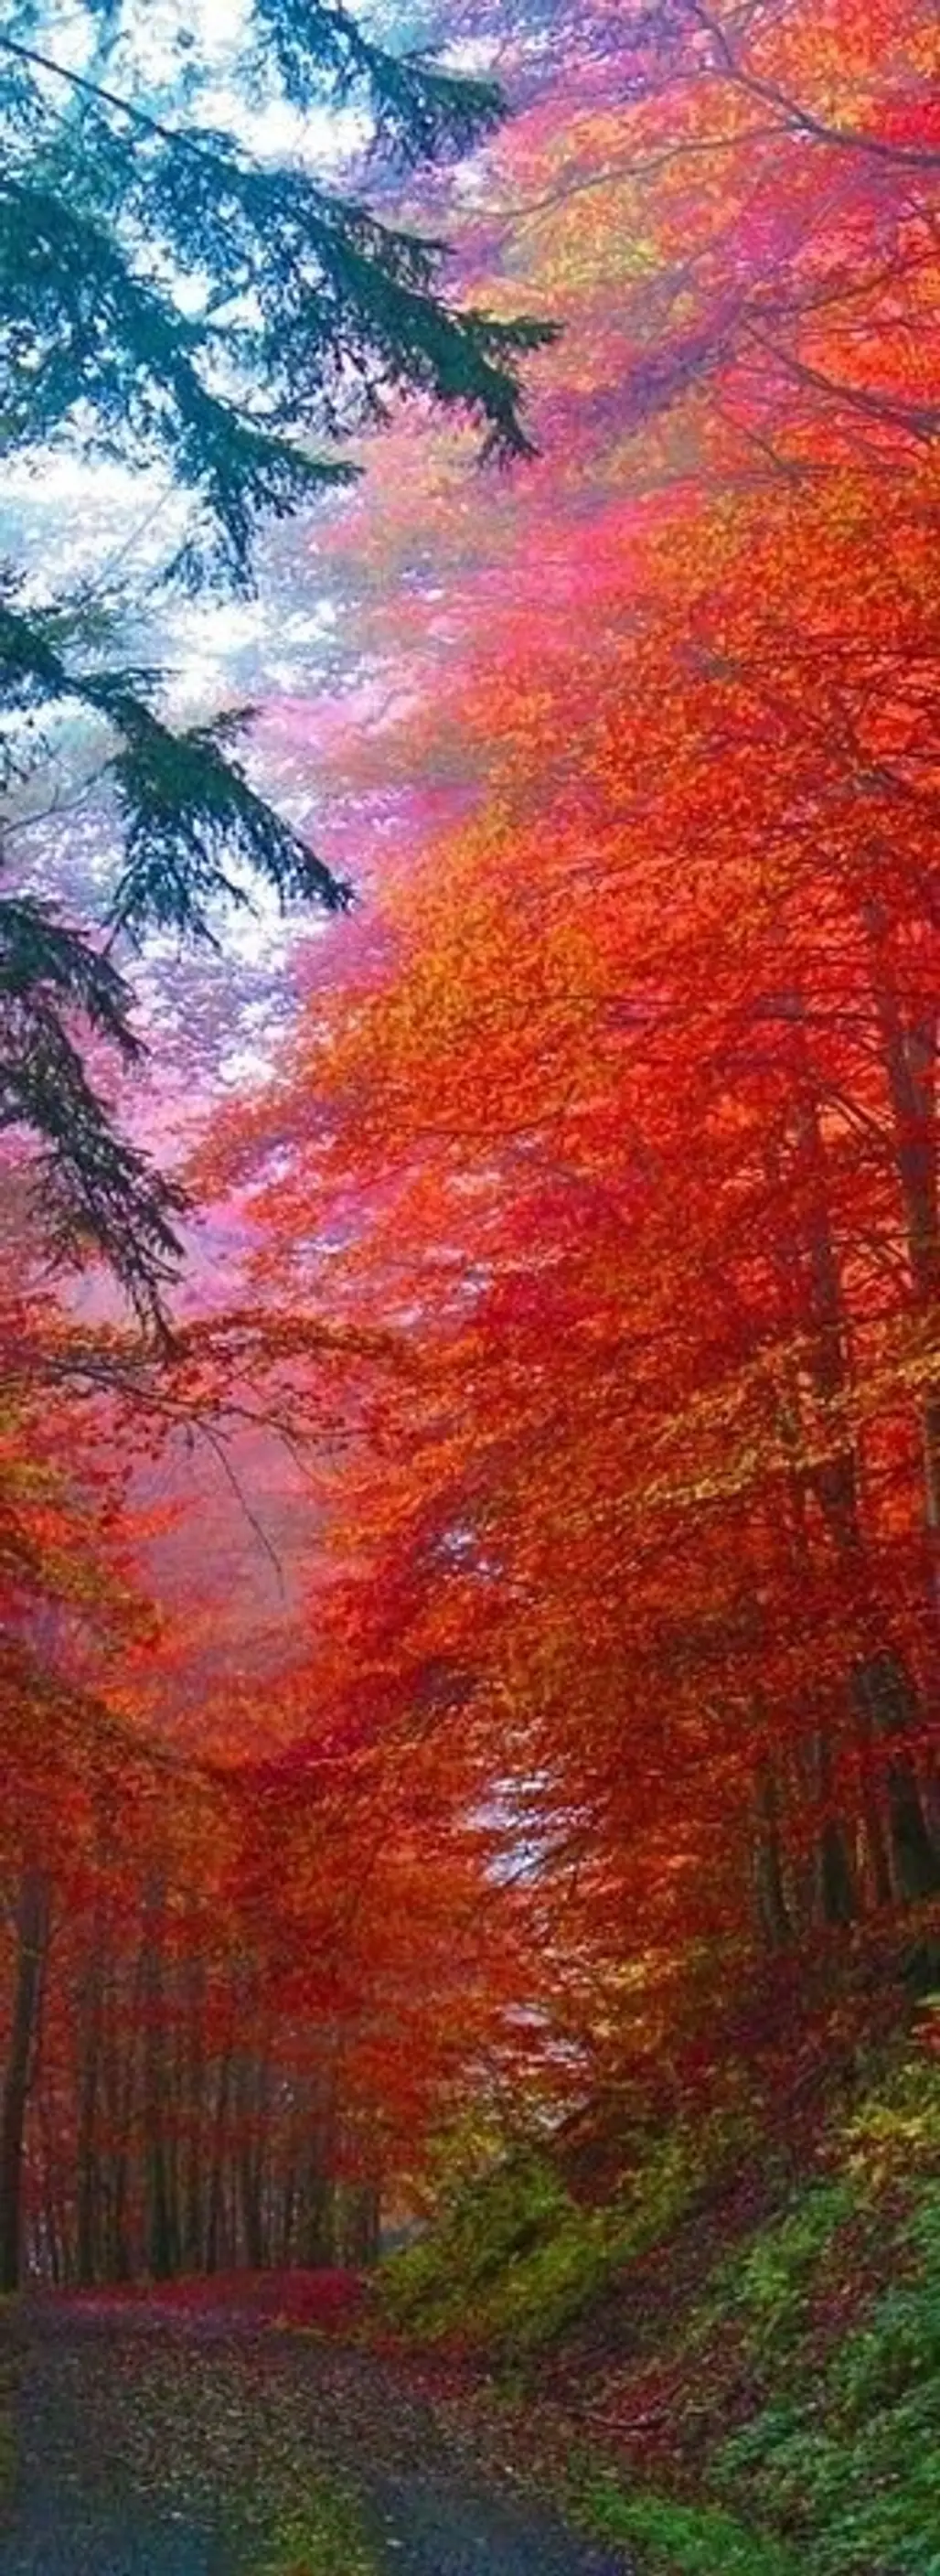 Forest Aflame